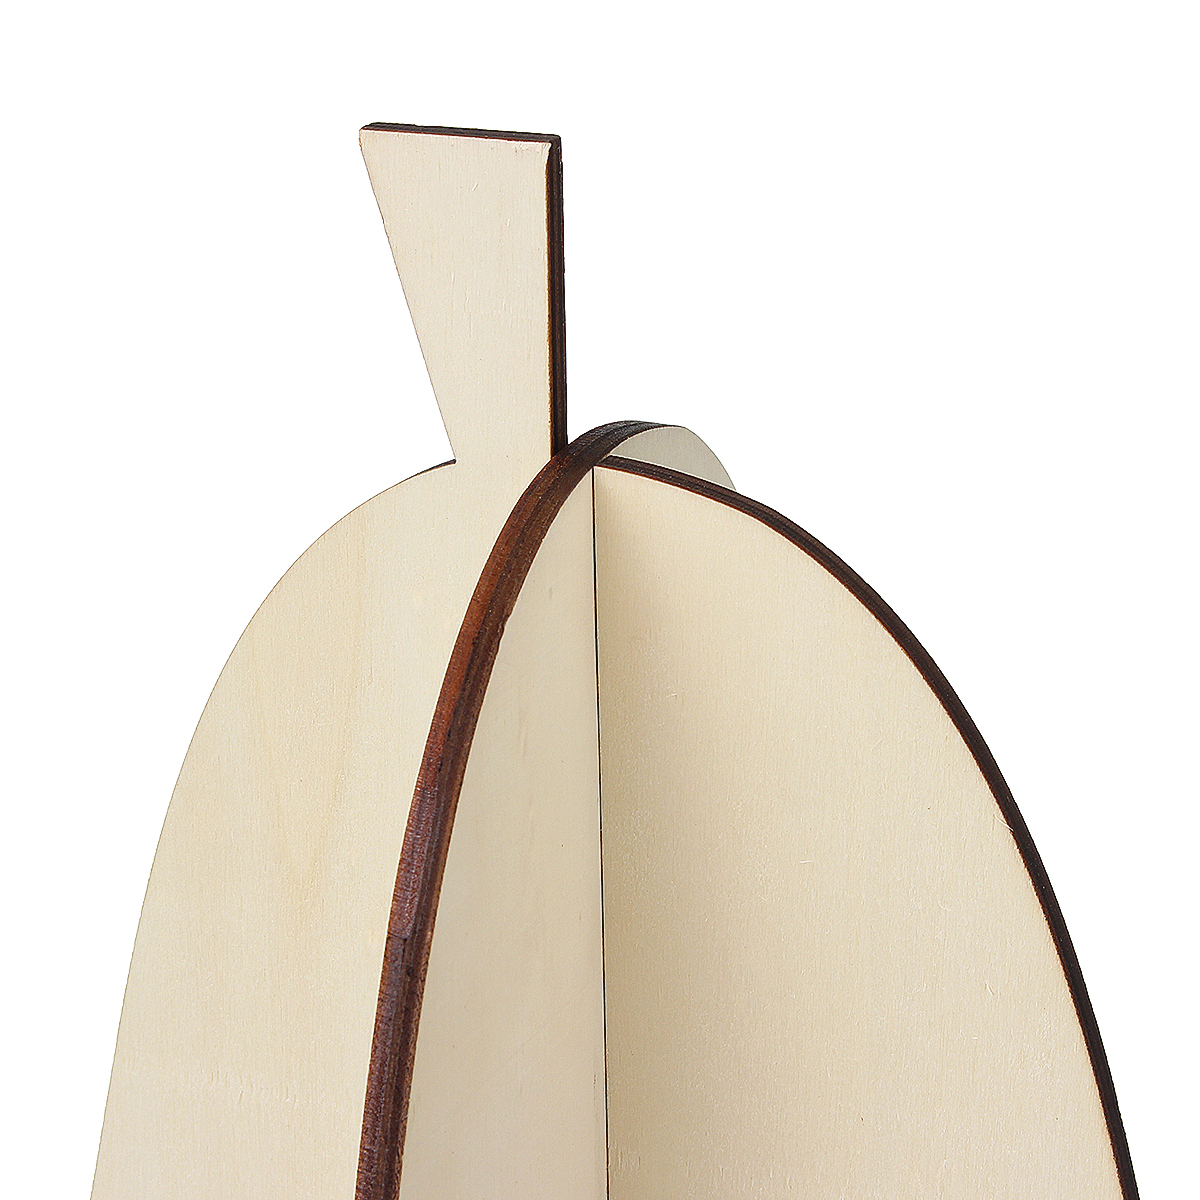 Wooden-Rack-Pear-shaped-Racks-Display-Craft-Shelf-Home-Decorations-Nordic-Style-Gift-1596581-10